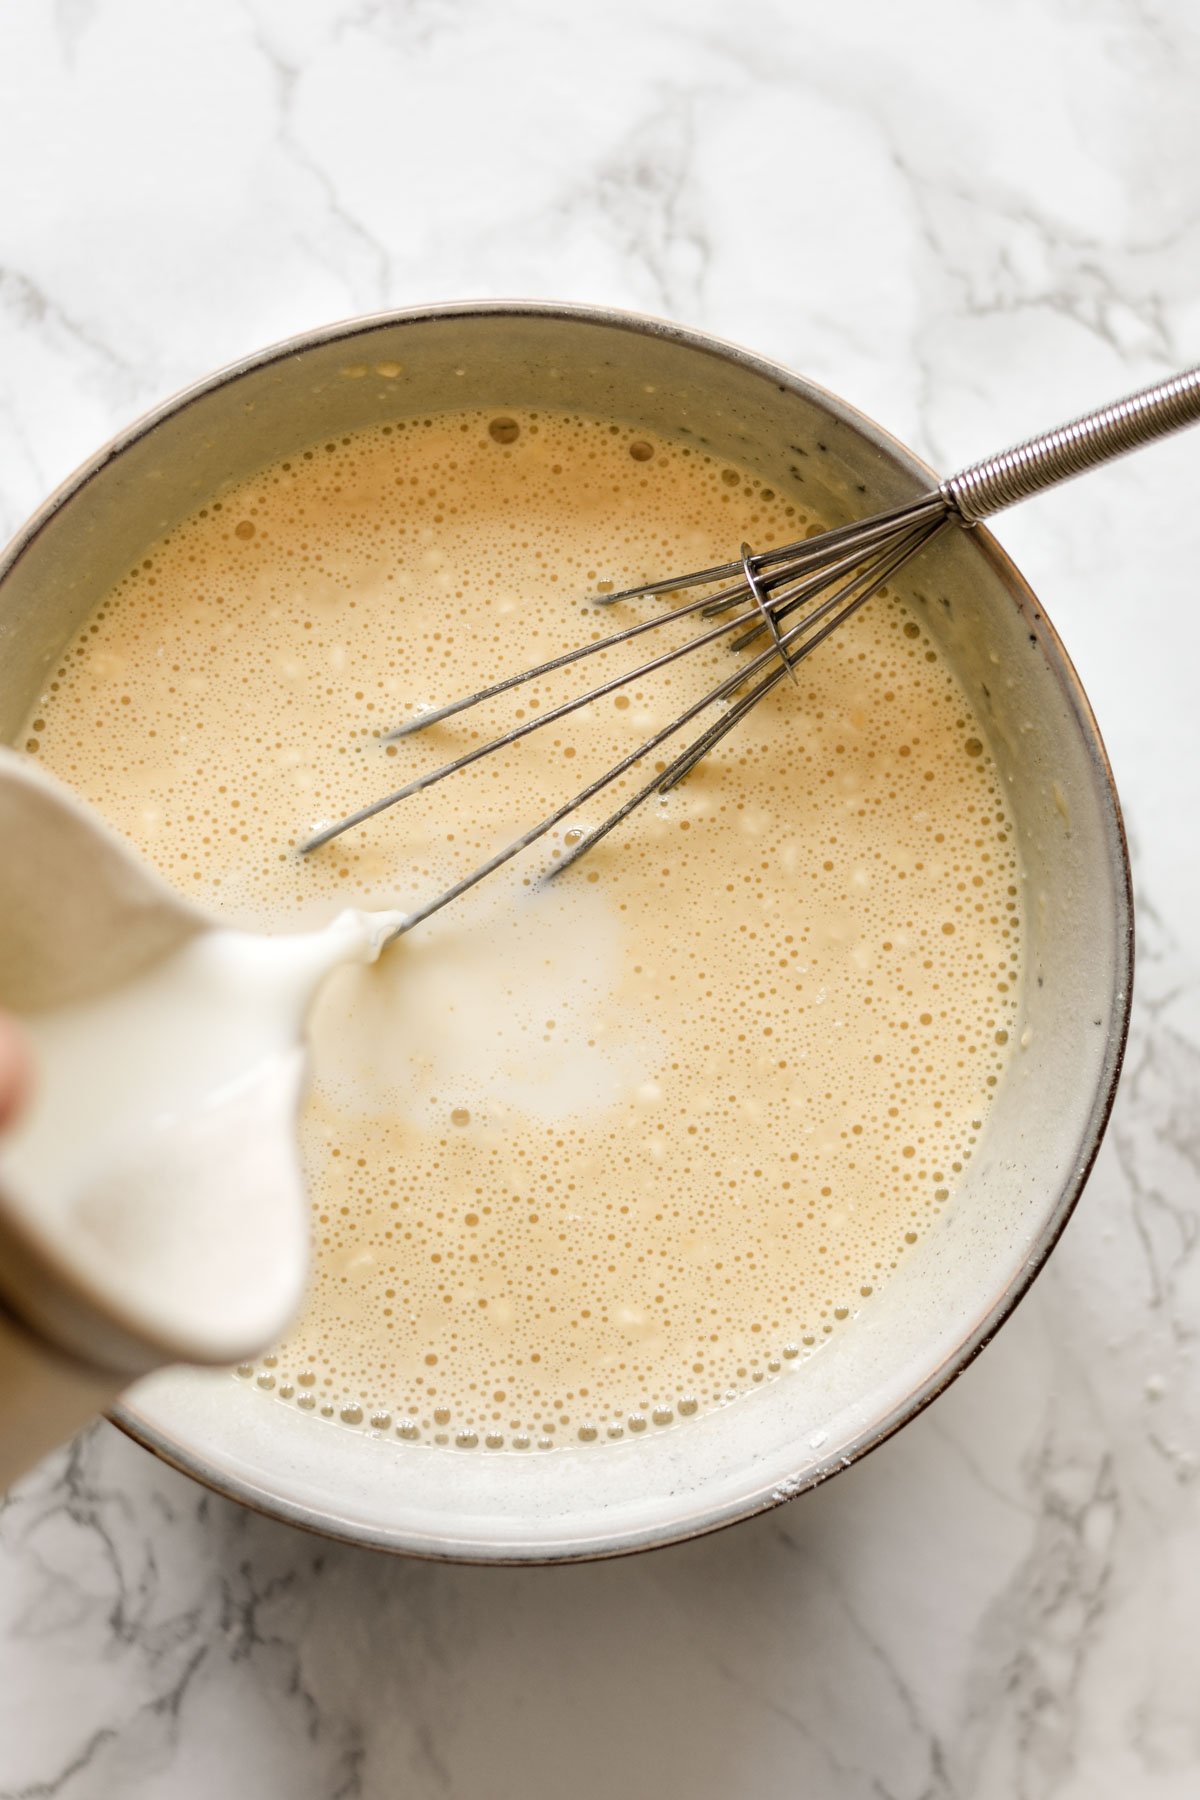 milk being poured into crepe batter